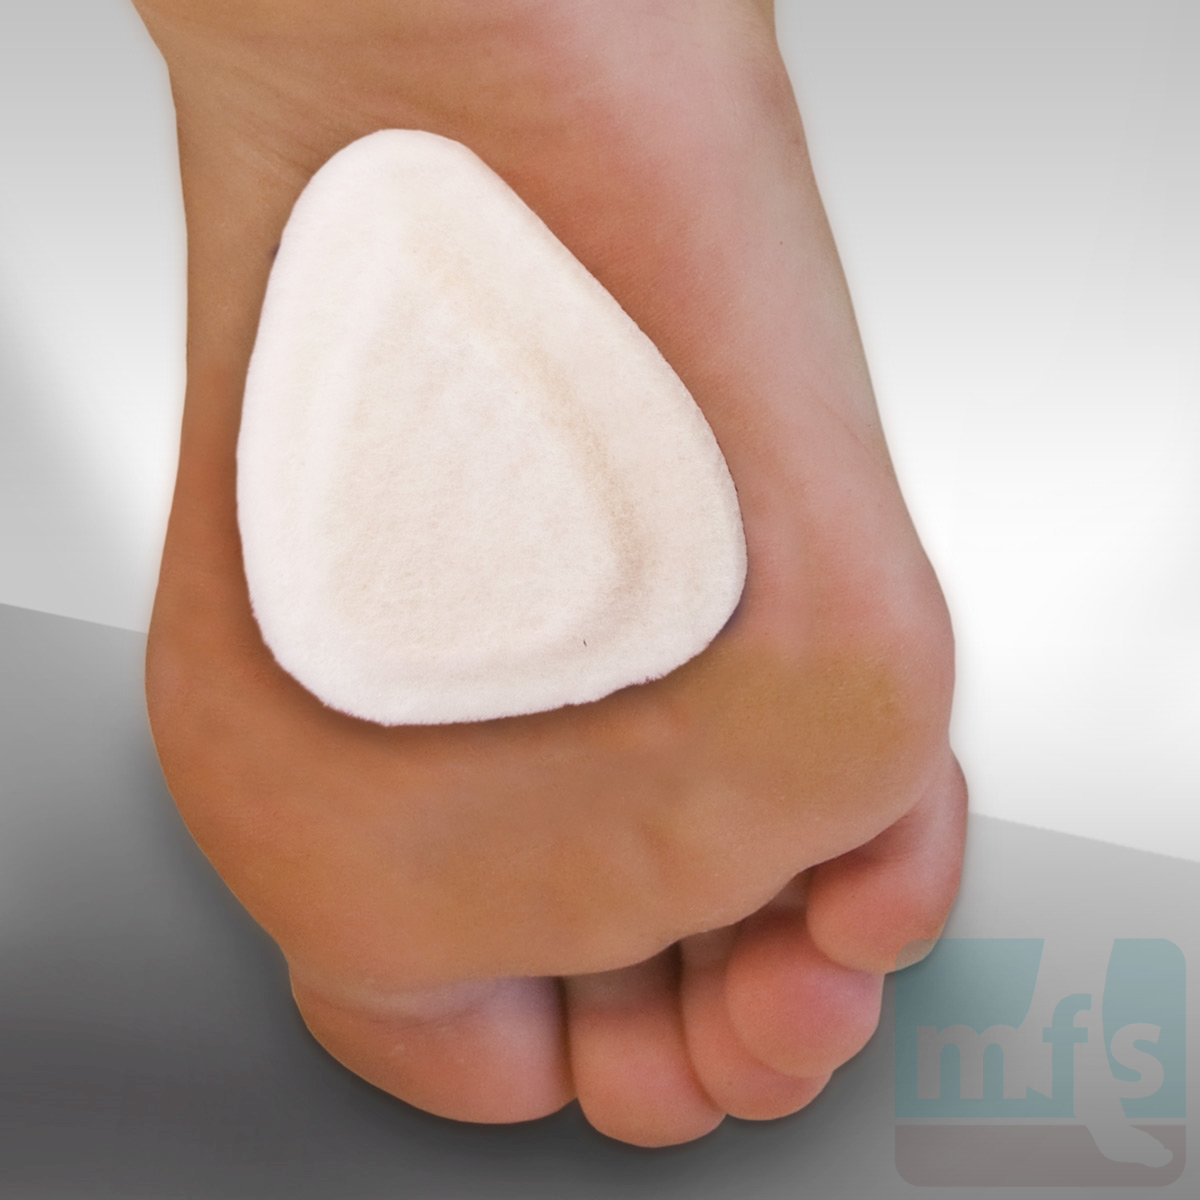 / metatarsalgia Metatarsal Products Home Metatarsal  shoes / Felt  for /  Pad pads Forefoot